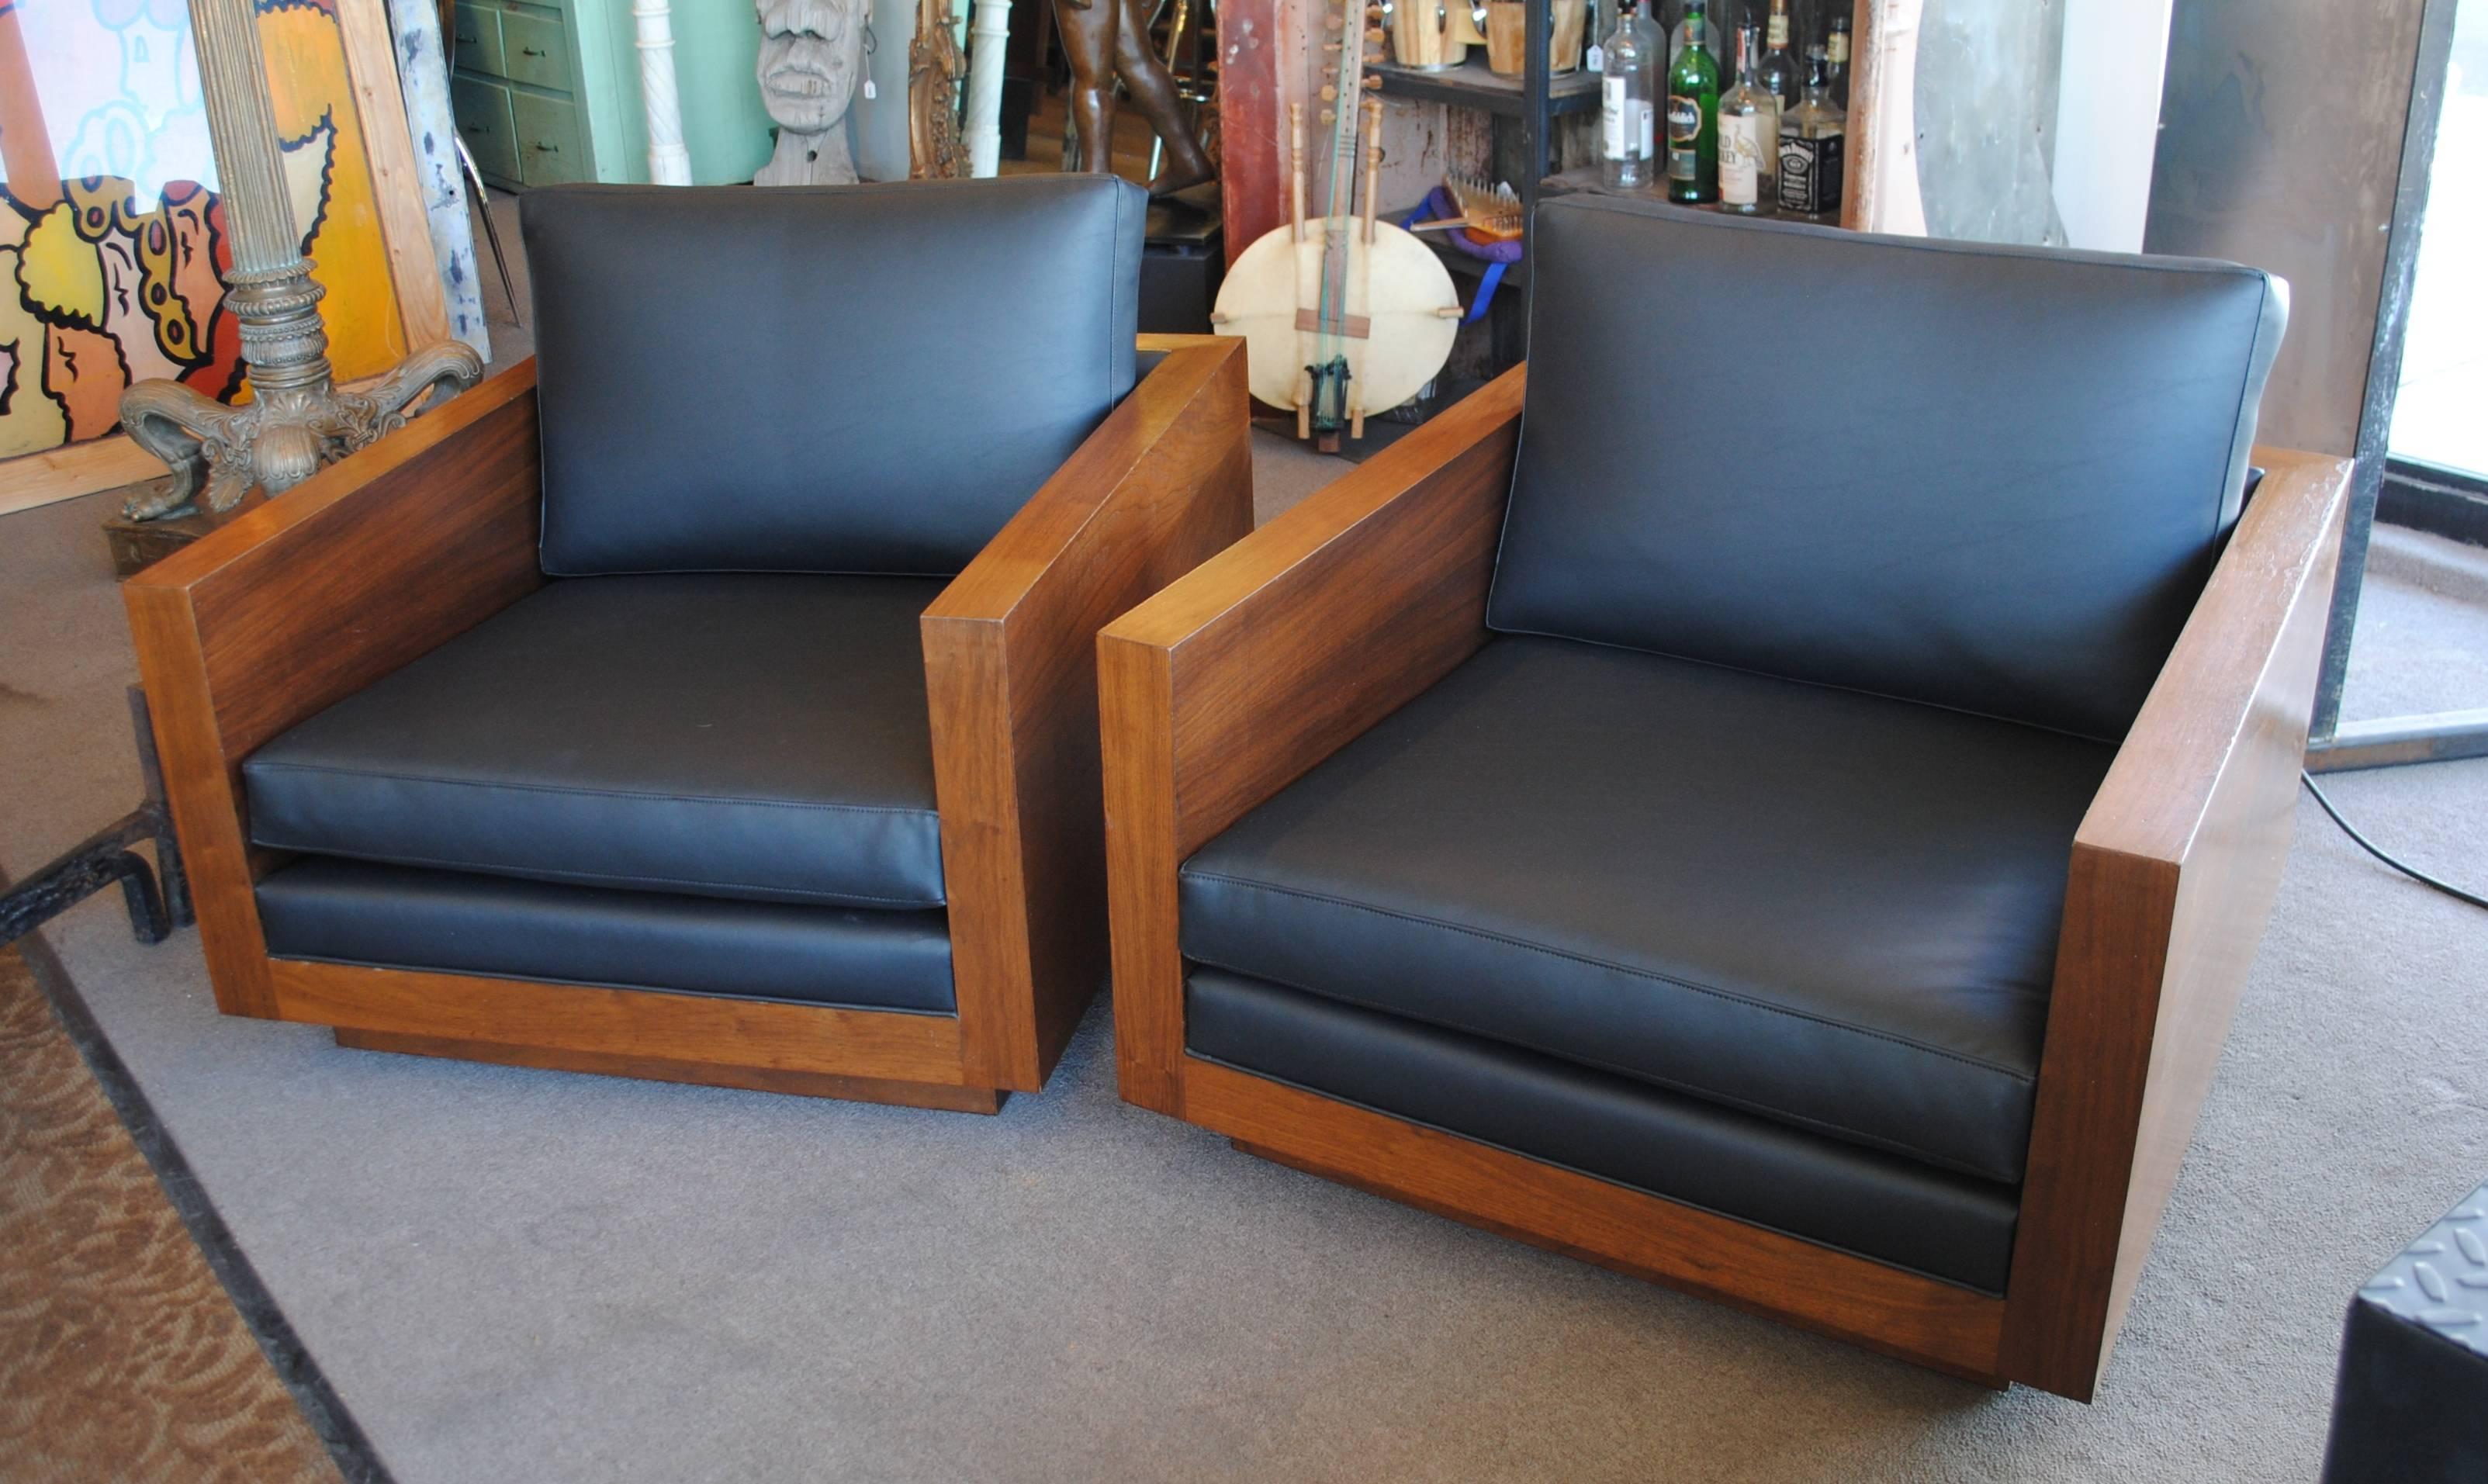 Gorgeous pair of walnut cube chairs on plinth base. In very nice vintage condition. The walnut veneer is in overall good condition with restored flea bites on the armrests.